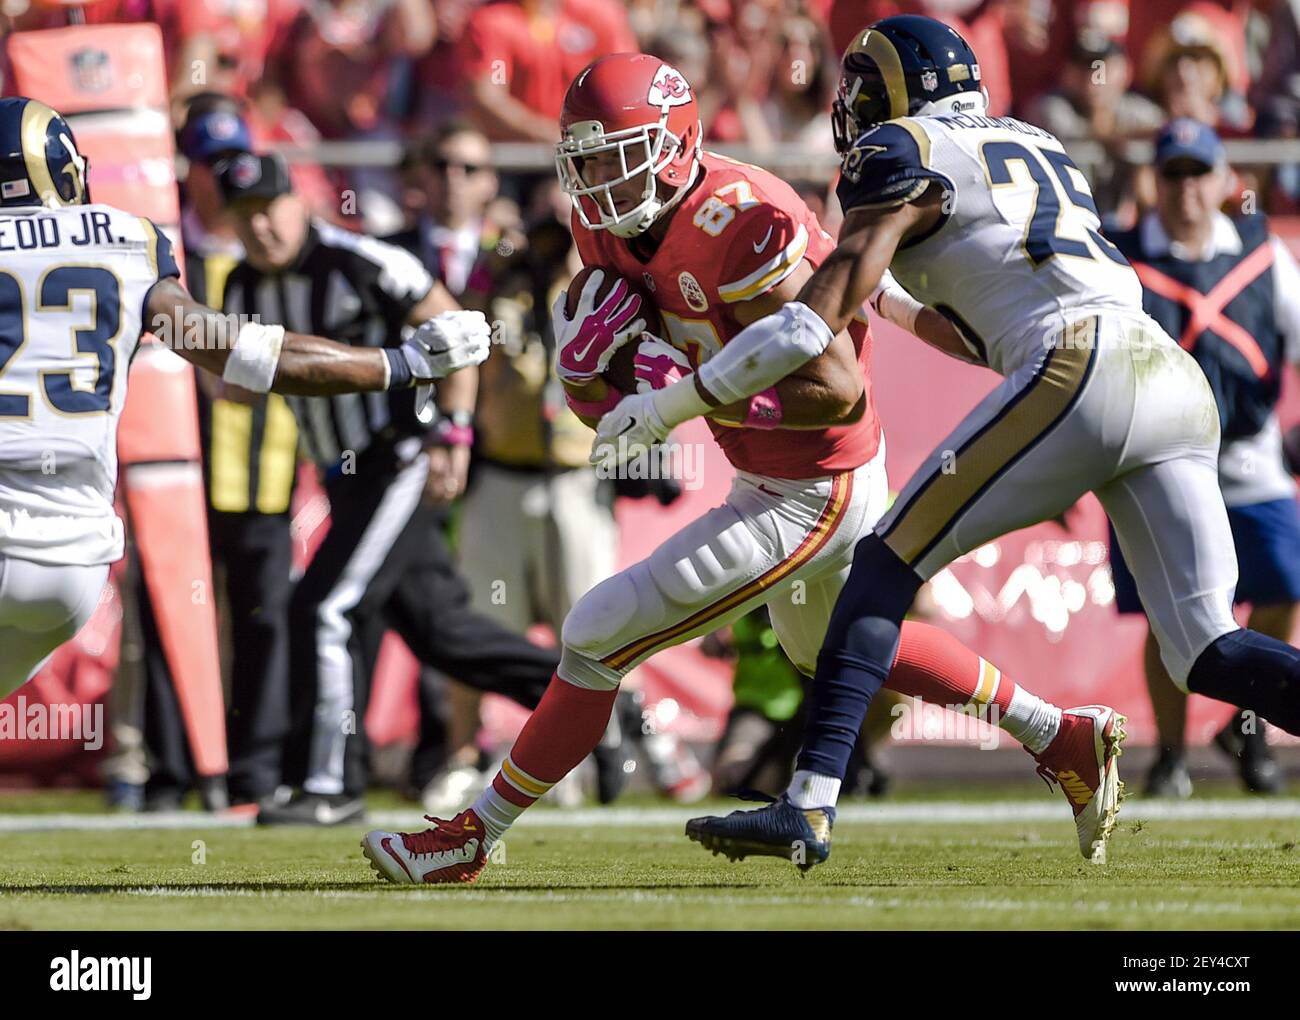 Kansas City Chiefs tight end Travis Kelce (87) gains yardage against the  St. Louis Rams strong safety T.J. McDonald (25) and Rams free safety Rodney  McLeod (23) Sunday, Oct. 26, 2014 at